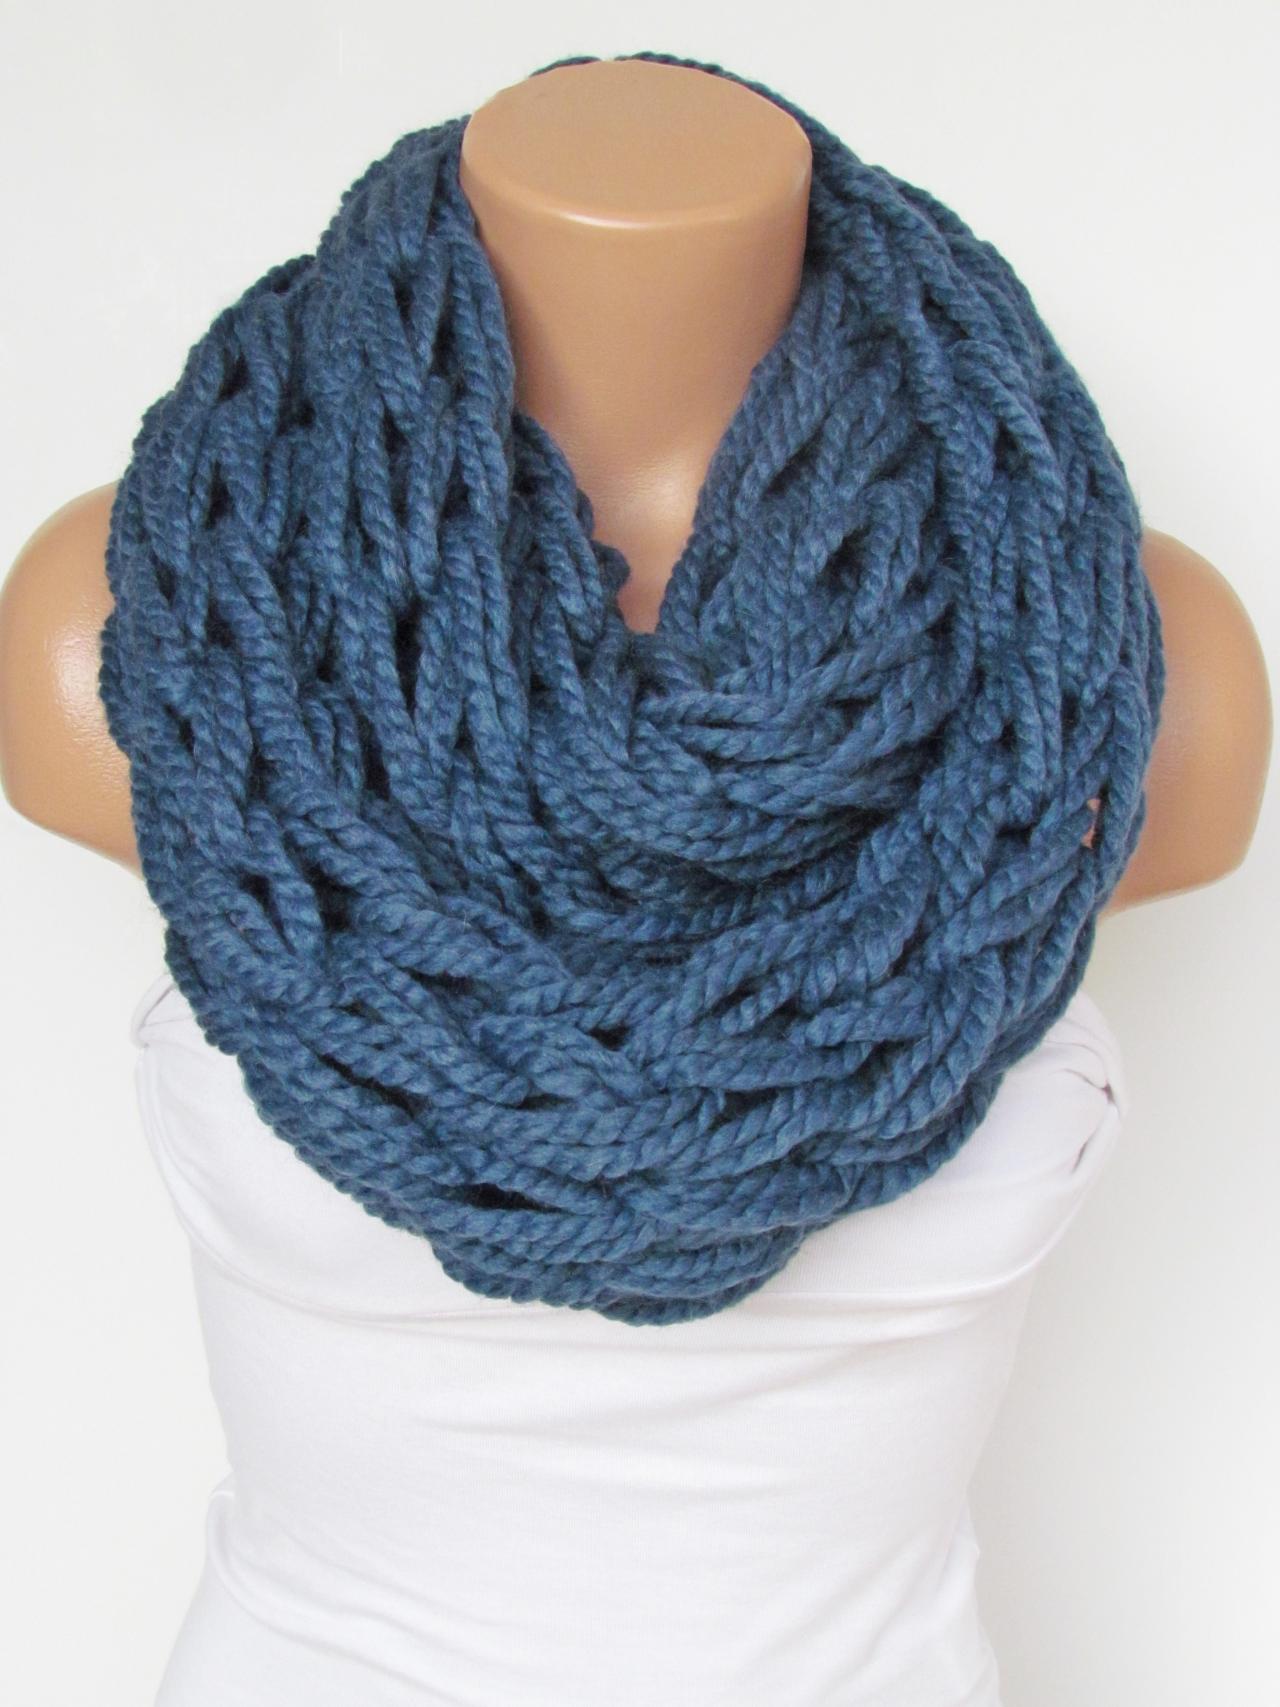 Infinity Navy Blue Scarf,Neckwarmer,Knitted Scarf,Circle Loop Scarf, Winter Accessories, Fall Fashion,Chunky Scarf.Cowl Scarf